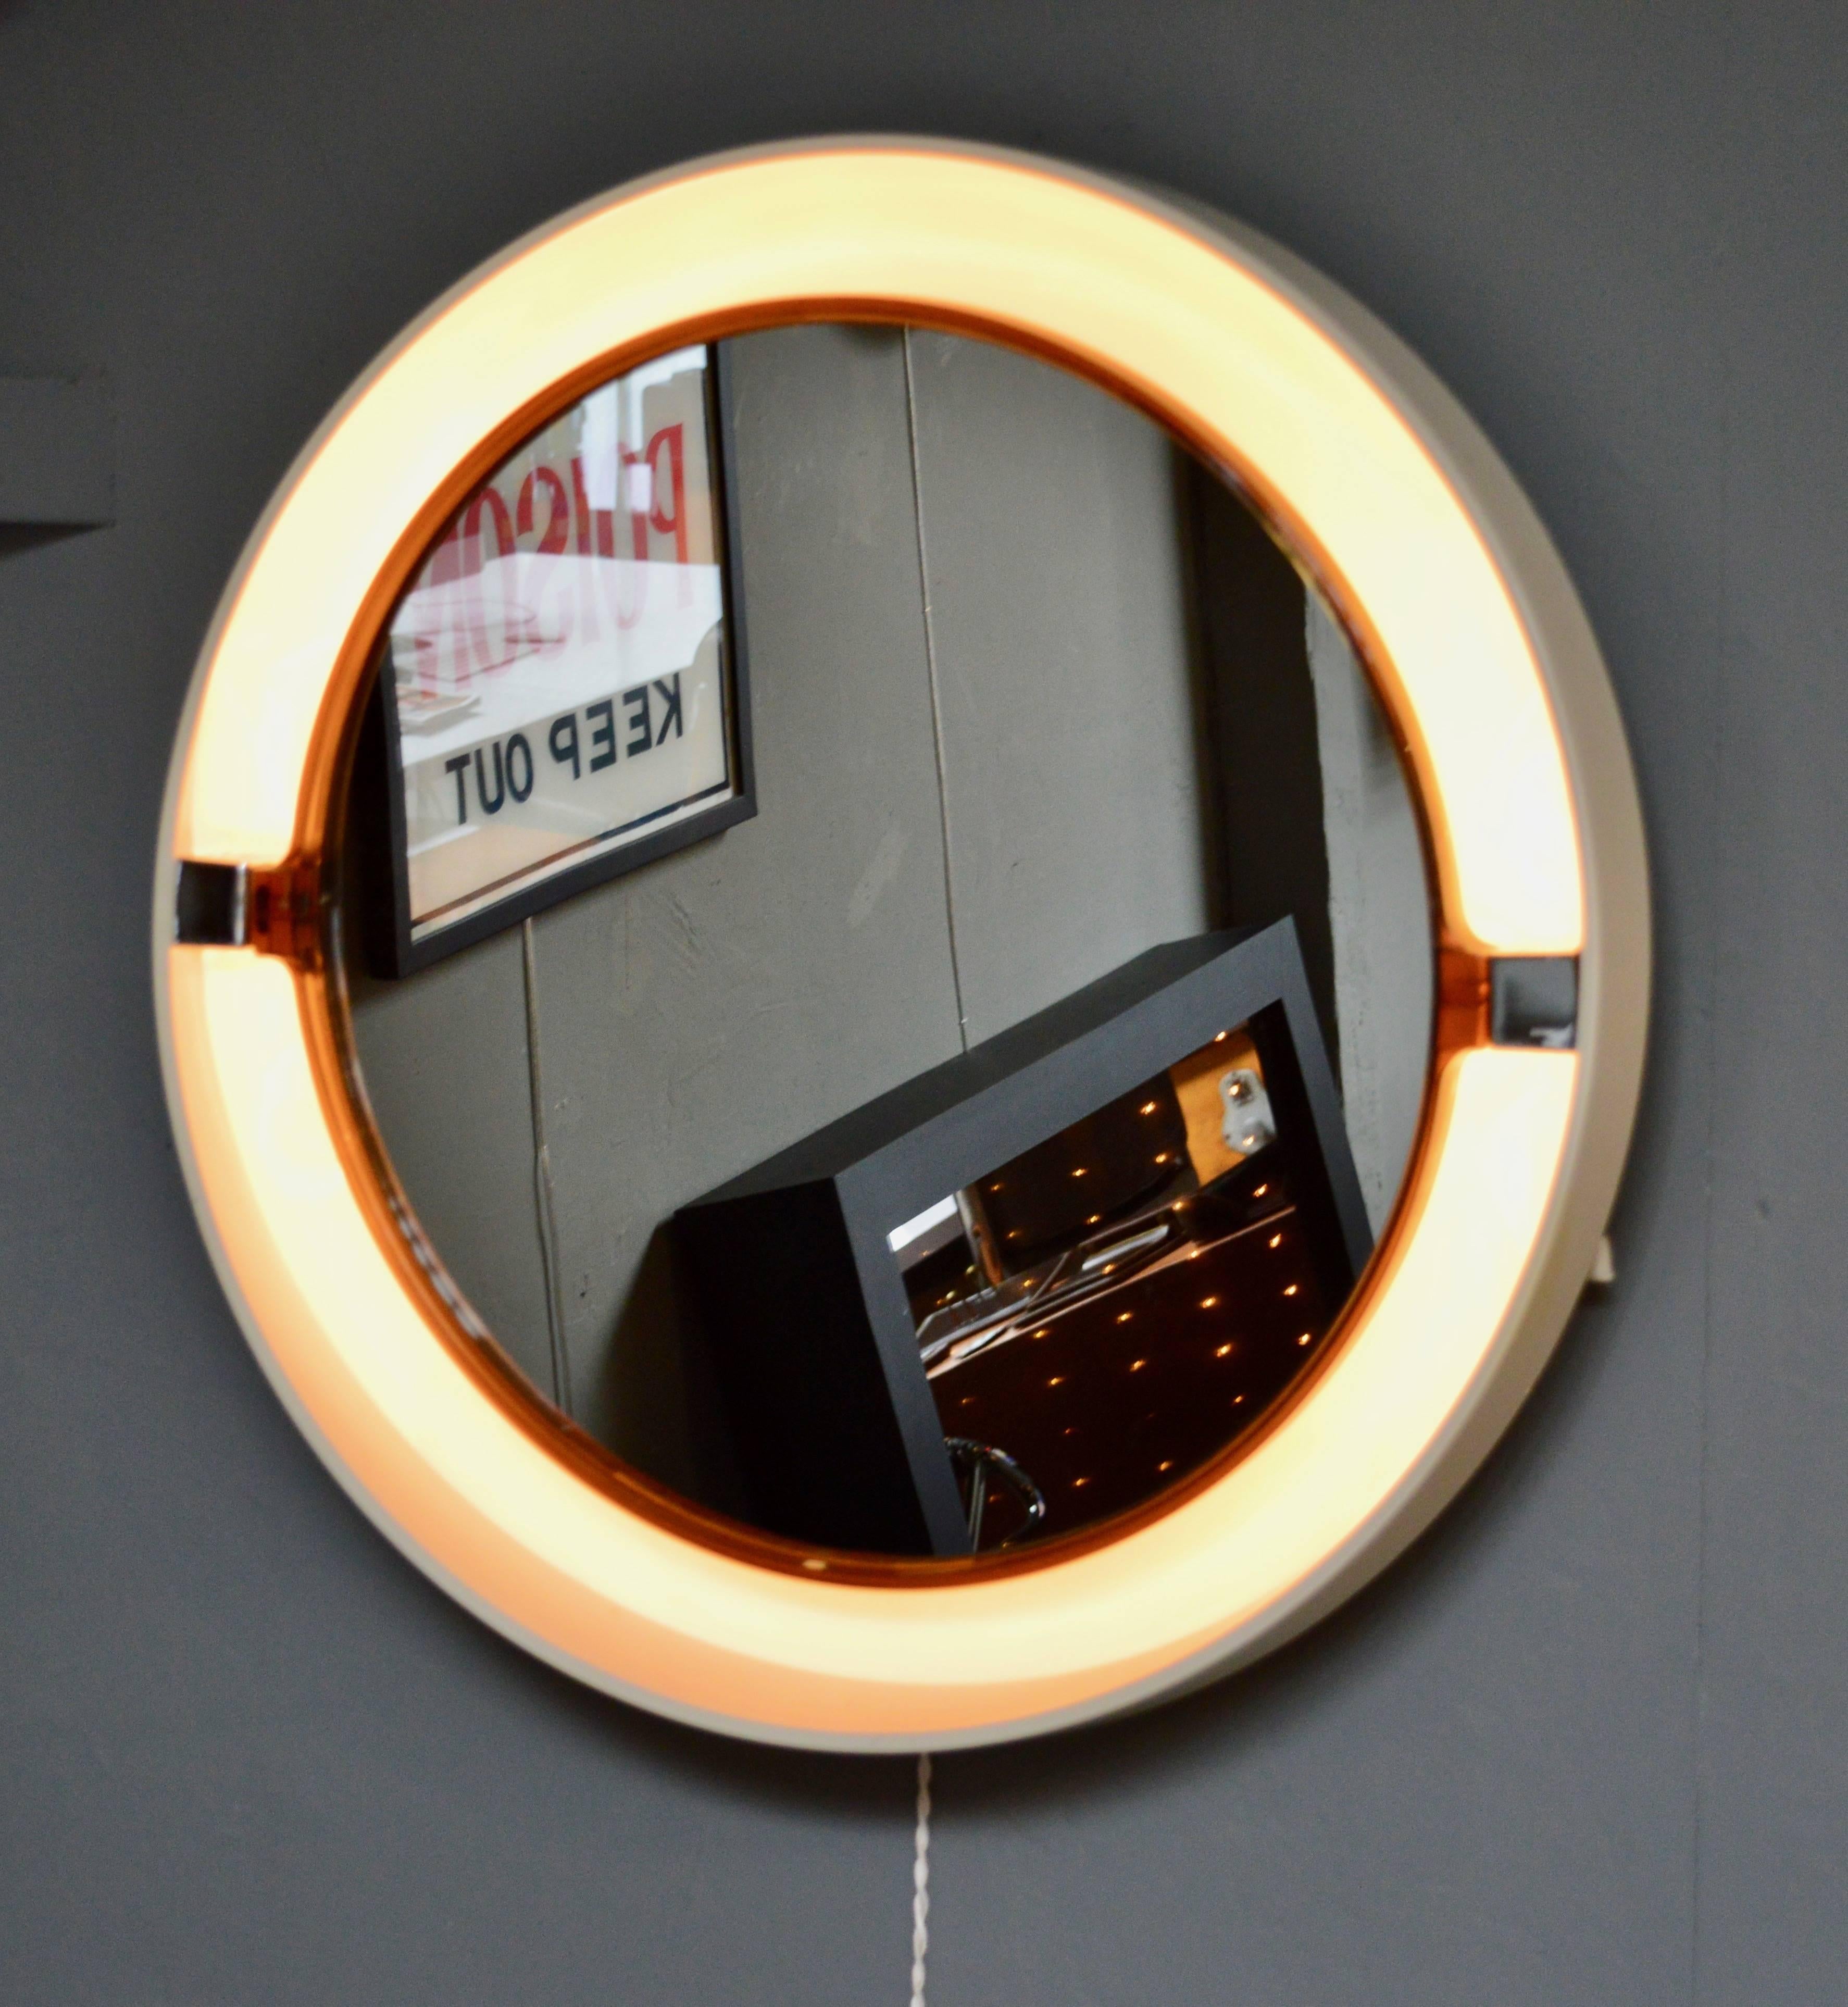 Fantastic vintage plastic and plexiglass adjustable mirror made in Germany. Plastic frame with plexiglass trimmed mirror. Perfect size. Small pull switch on side to turn on and off. Mirror angles up or down. Looks great on and off. Perfect for a